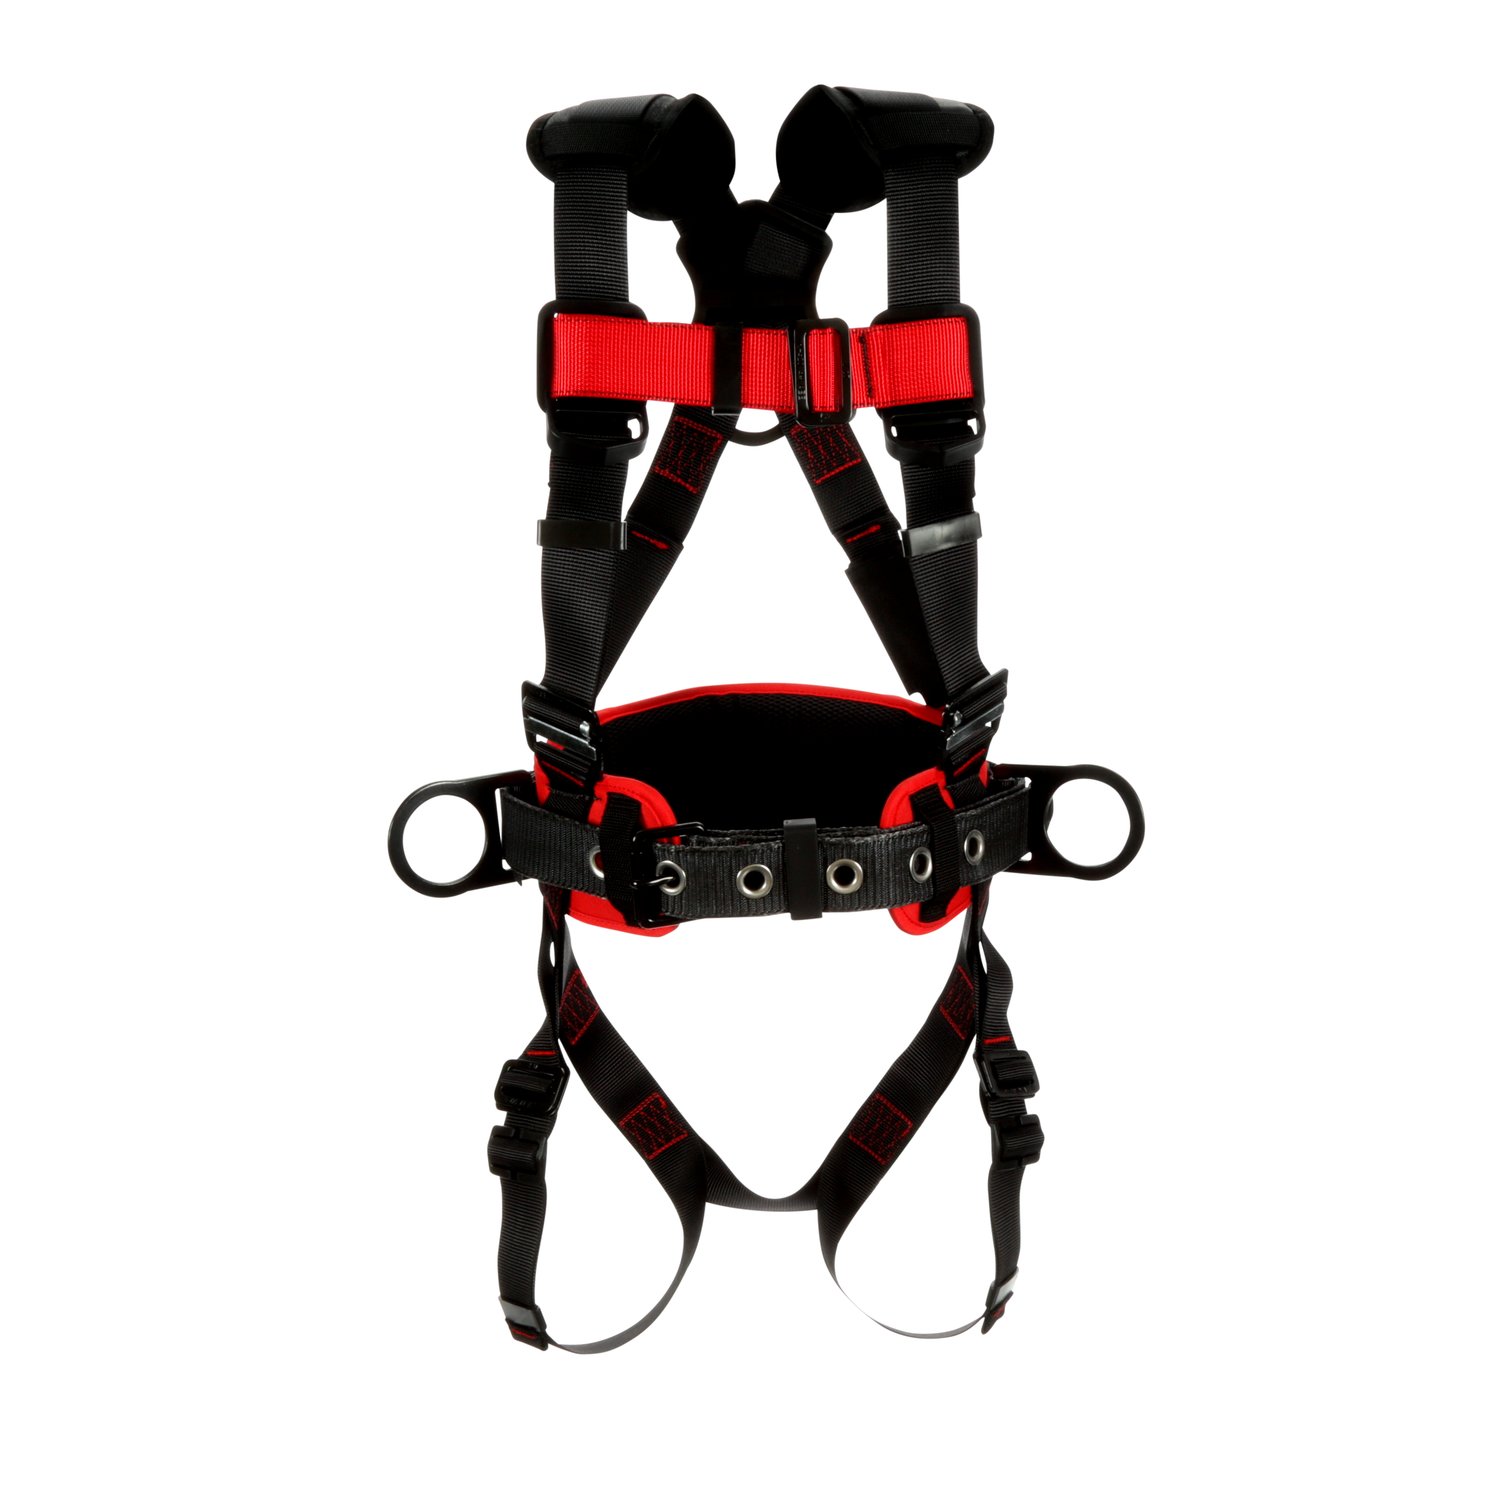 7012816641 - 3M Protecta P200 Construction Positioning Safety Harness 1161304, Small